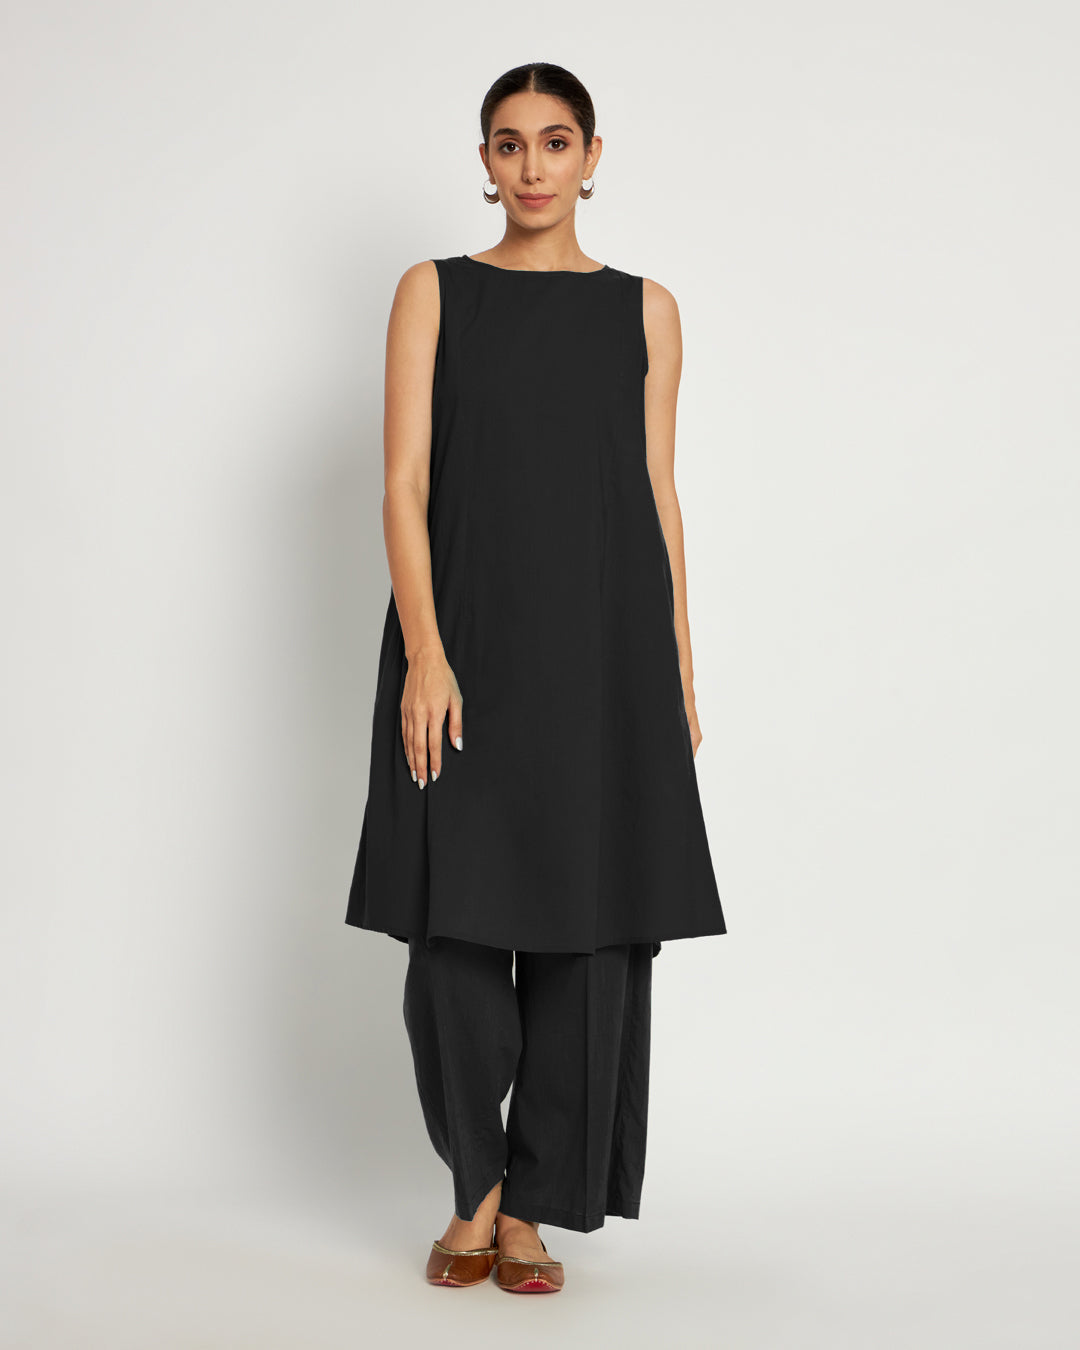 Classic Black Sleeveless A-Line Solid Kurta (Without Bottoms)